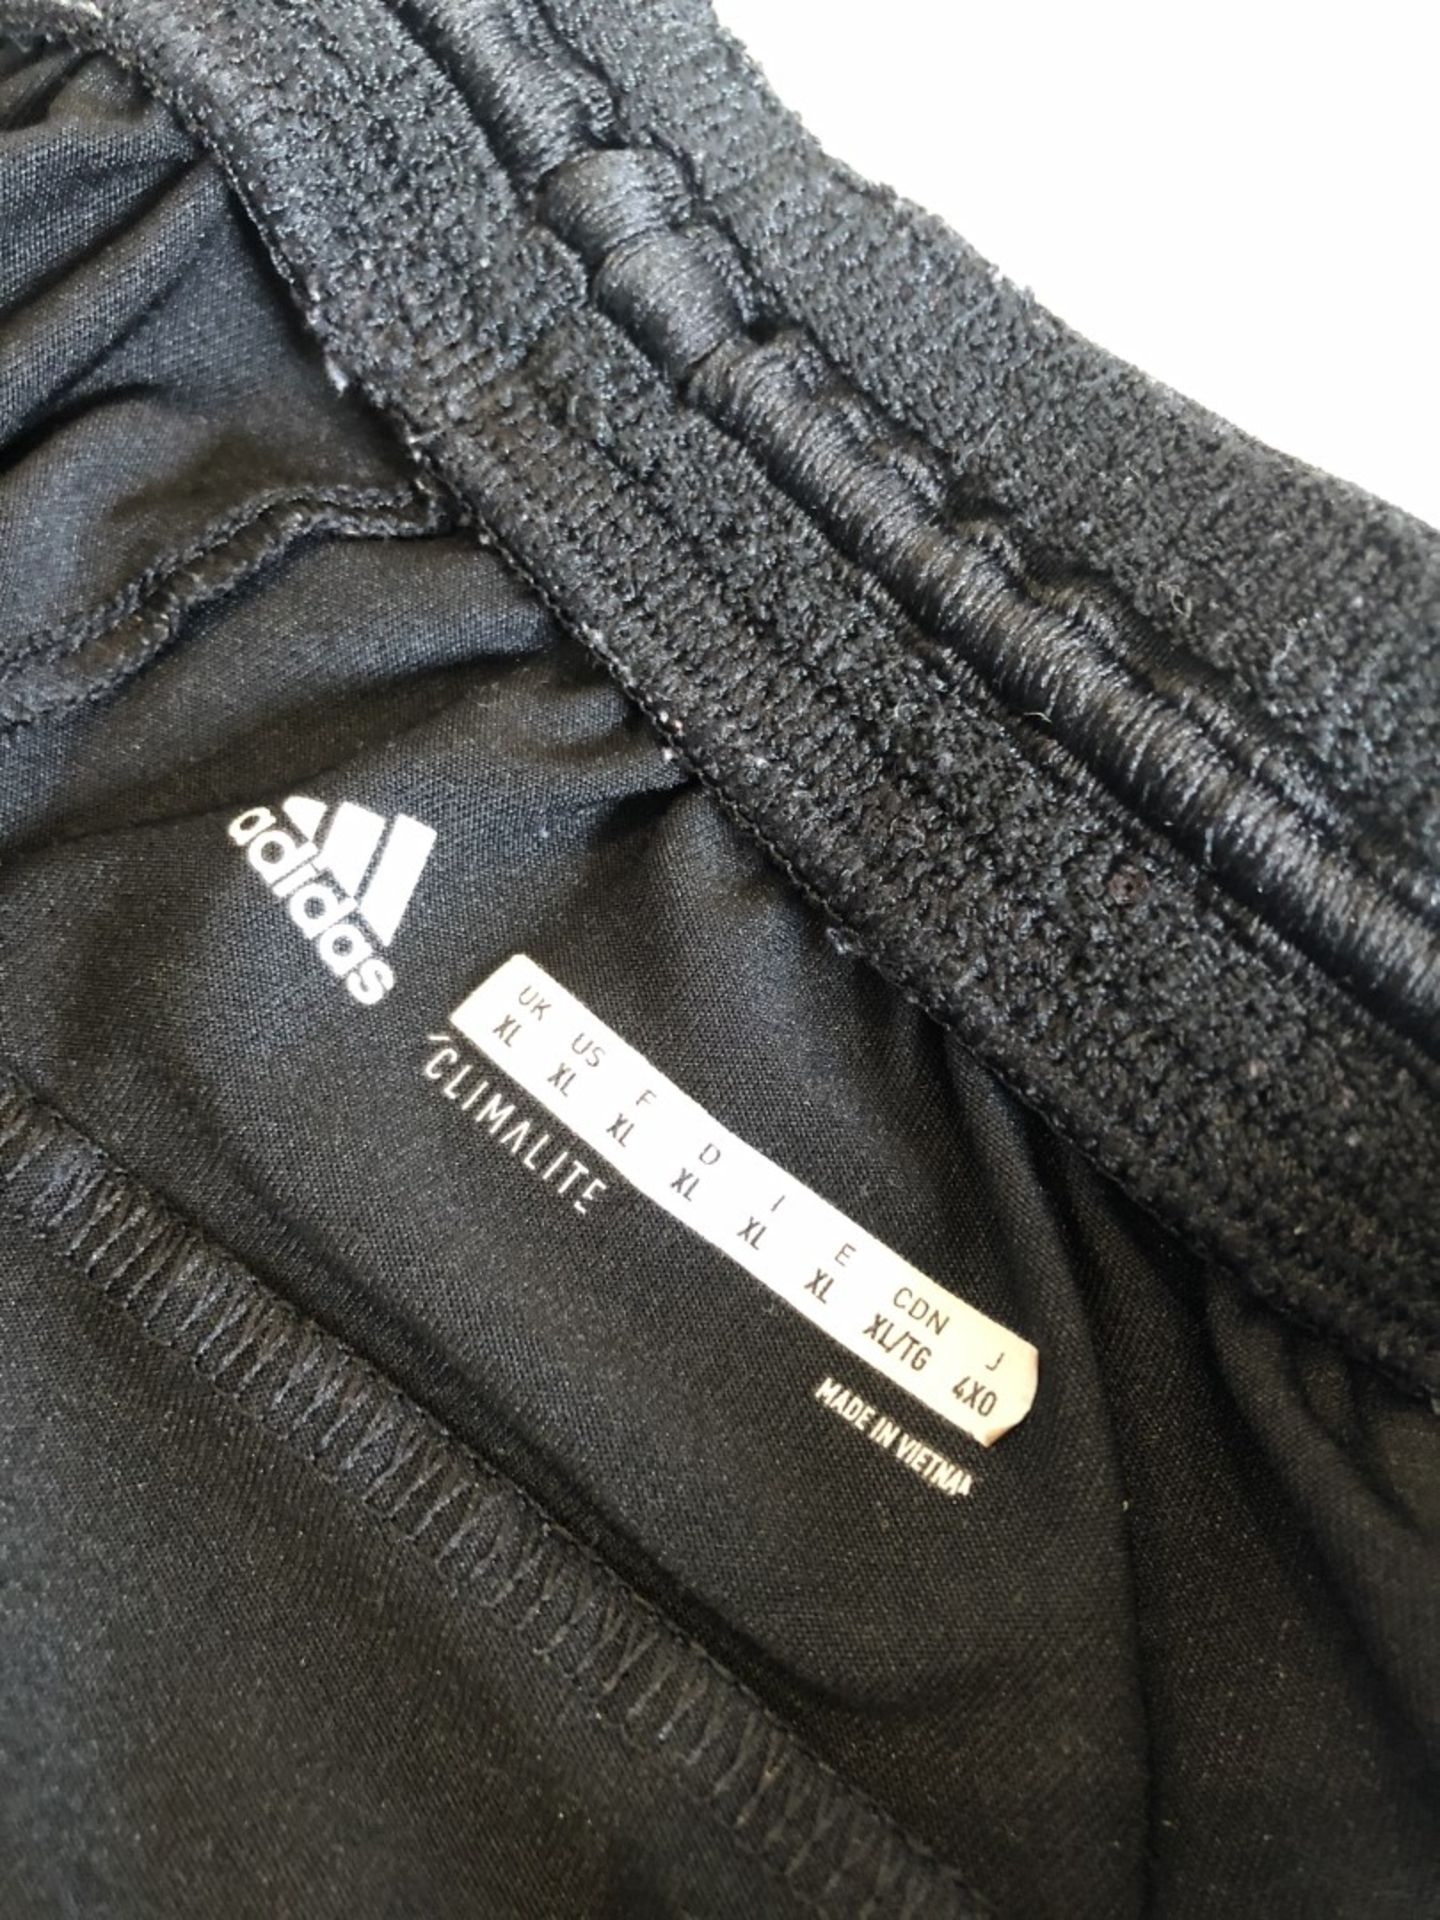 4 x Assorted Pairs Of Men's Genuine Adidas Shorts - AllIn Black - Sizes: L-XL - Preowned - Image 13 of 23